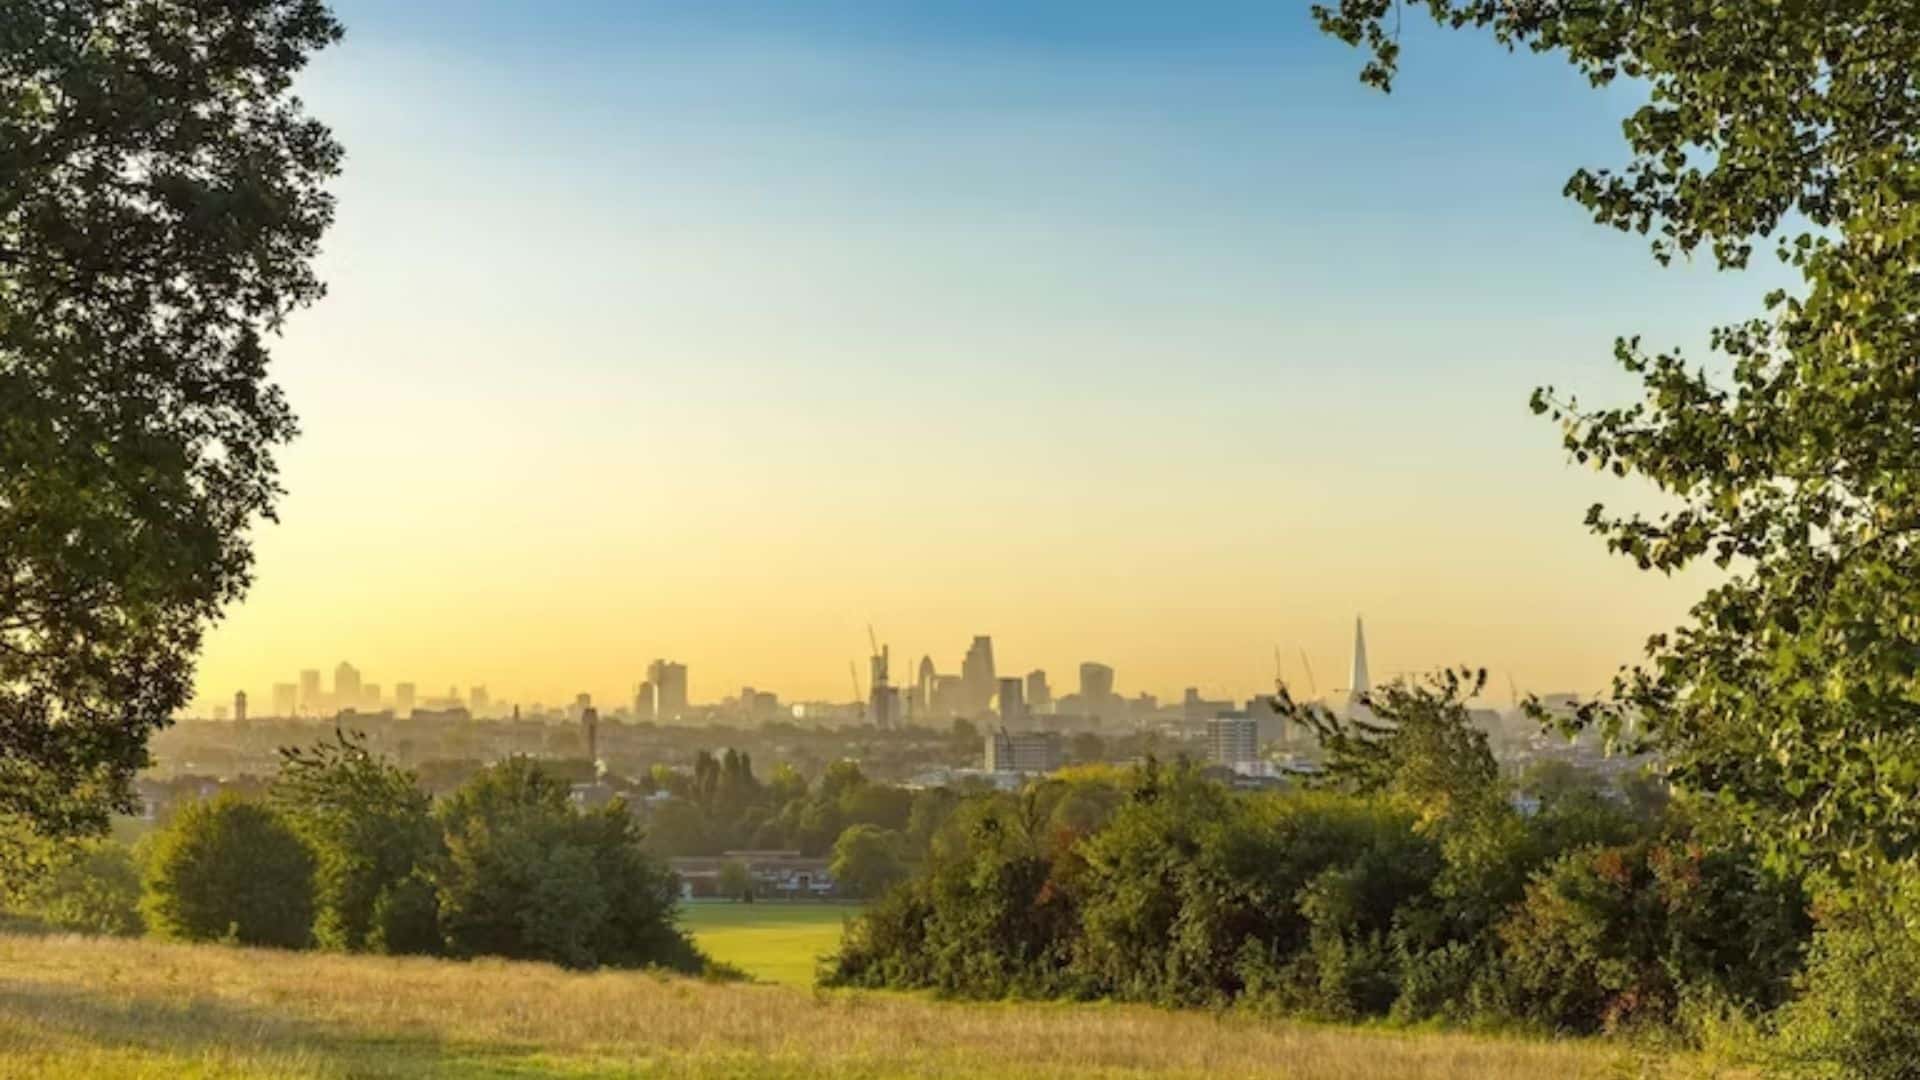 Square Mile green spaces worth billions in health and recreational benefits